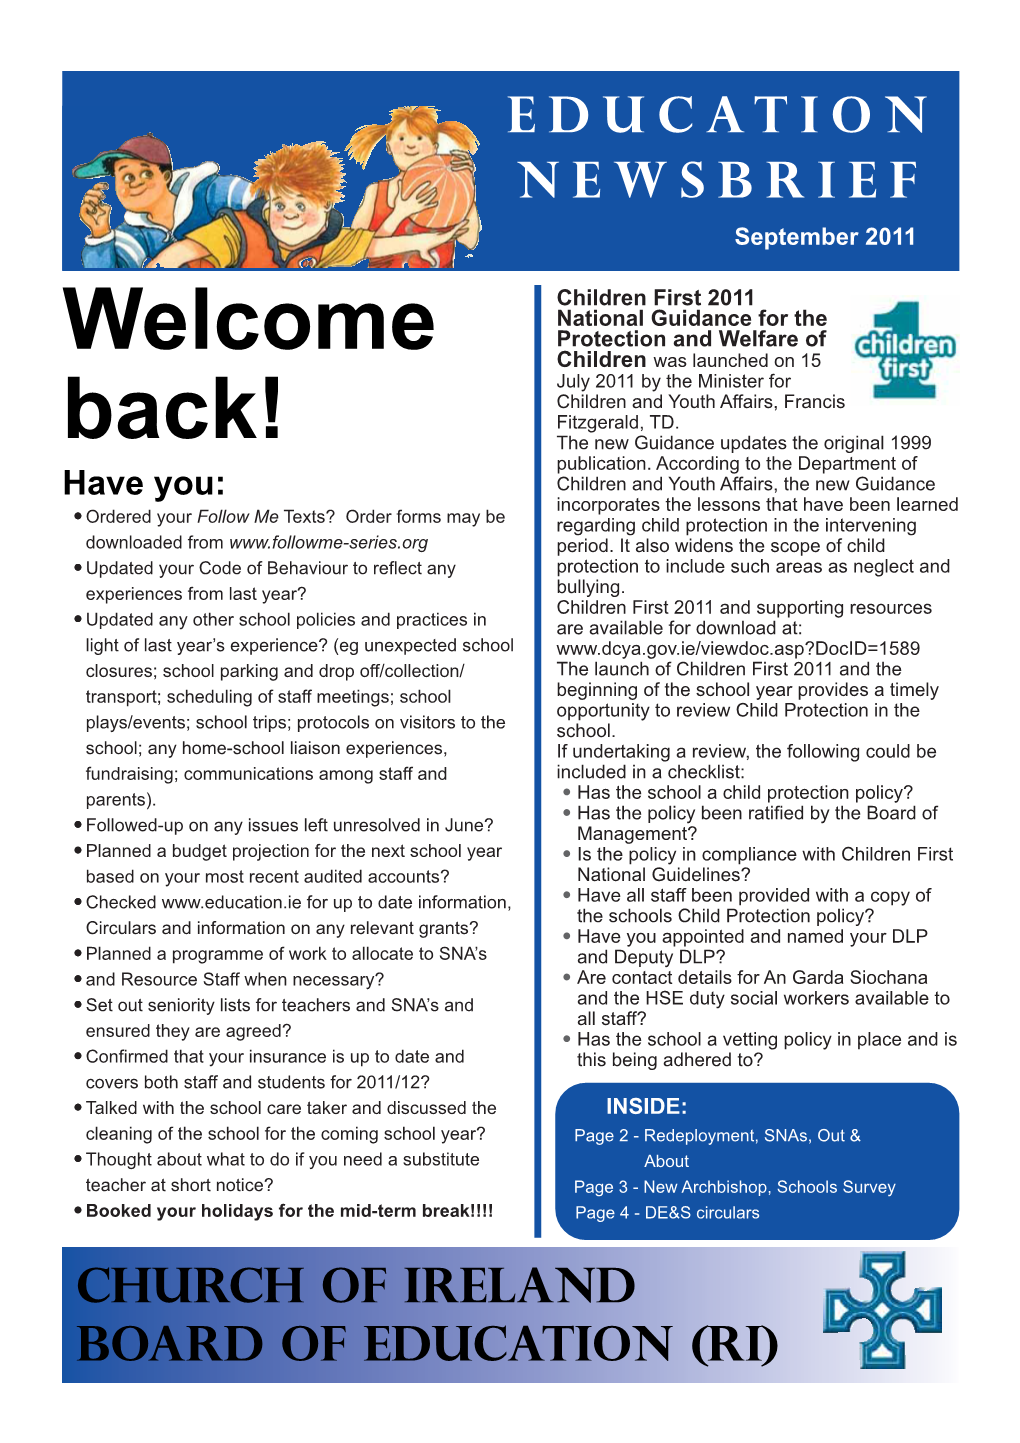 Back! the New Guidance Updates the Original 1999 Publication